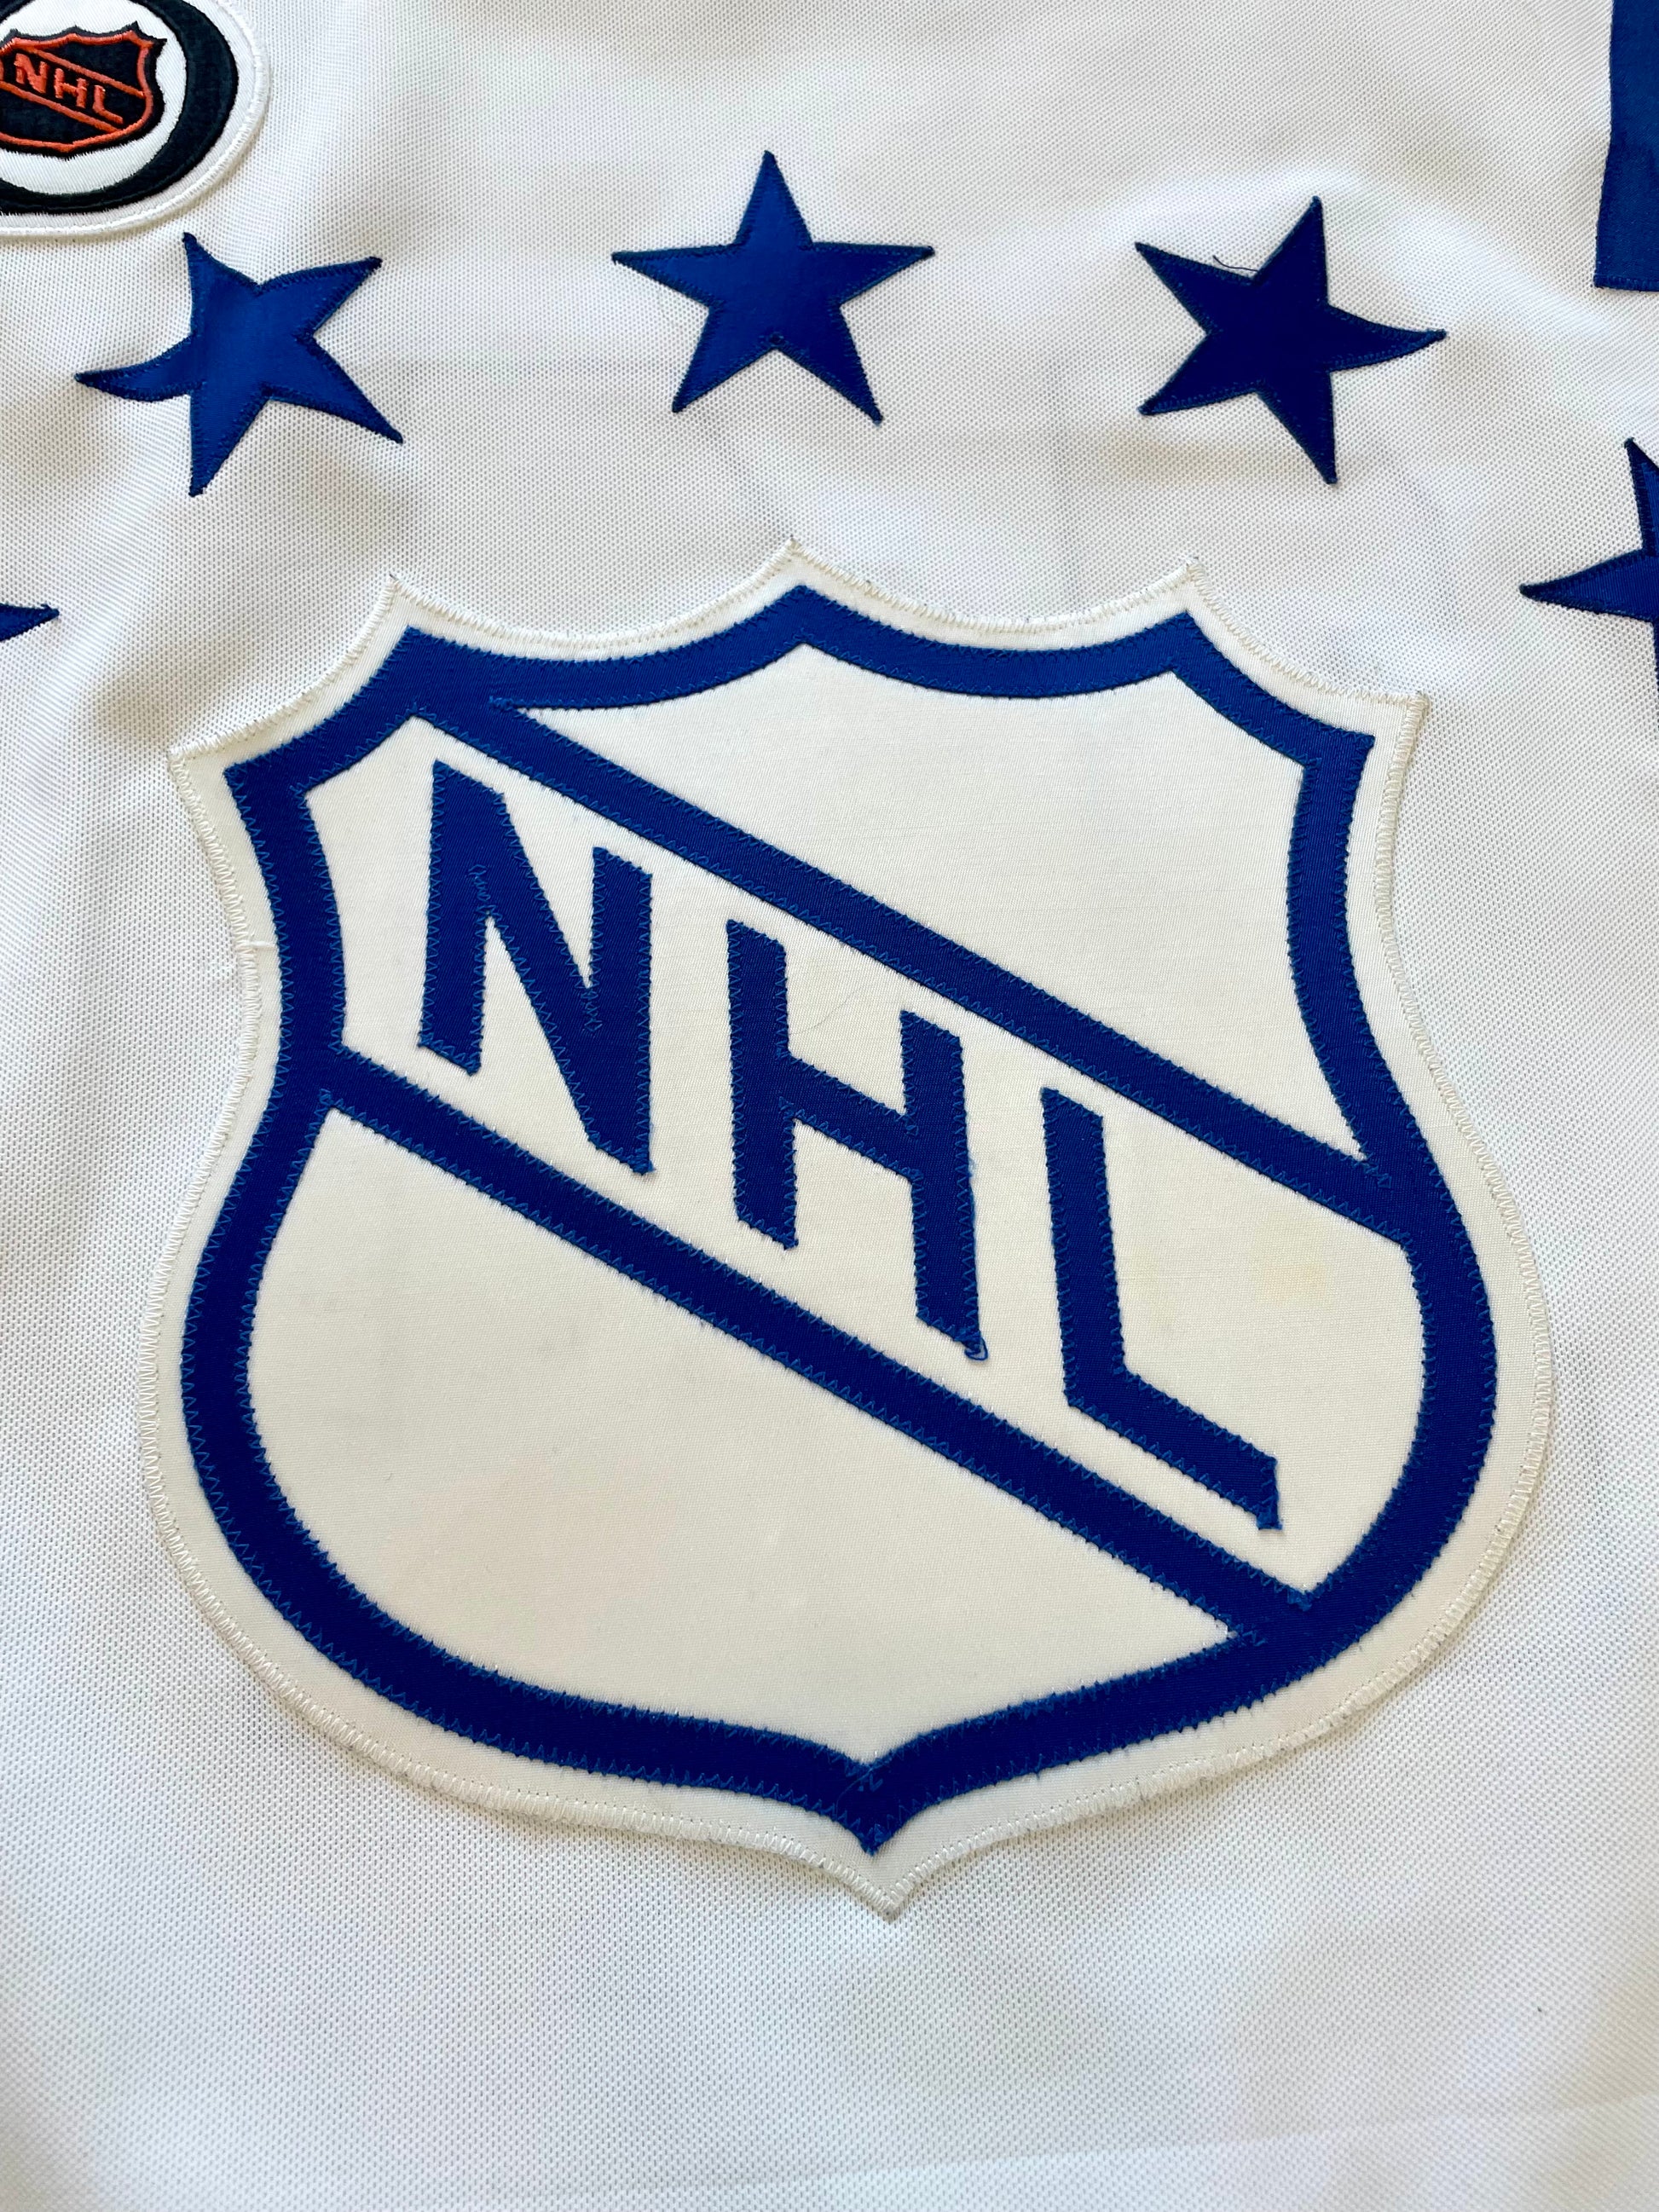 Shop NHL All-Star Game gear today